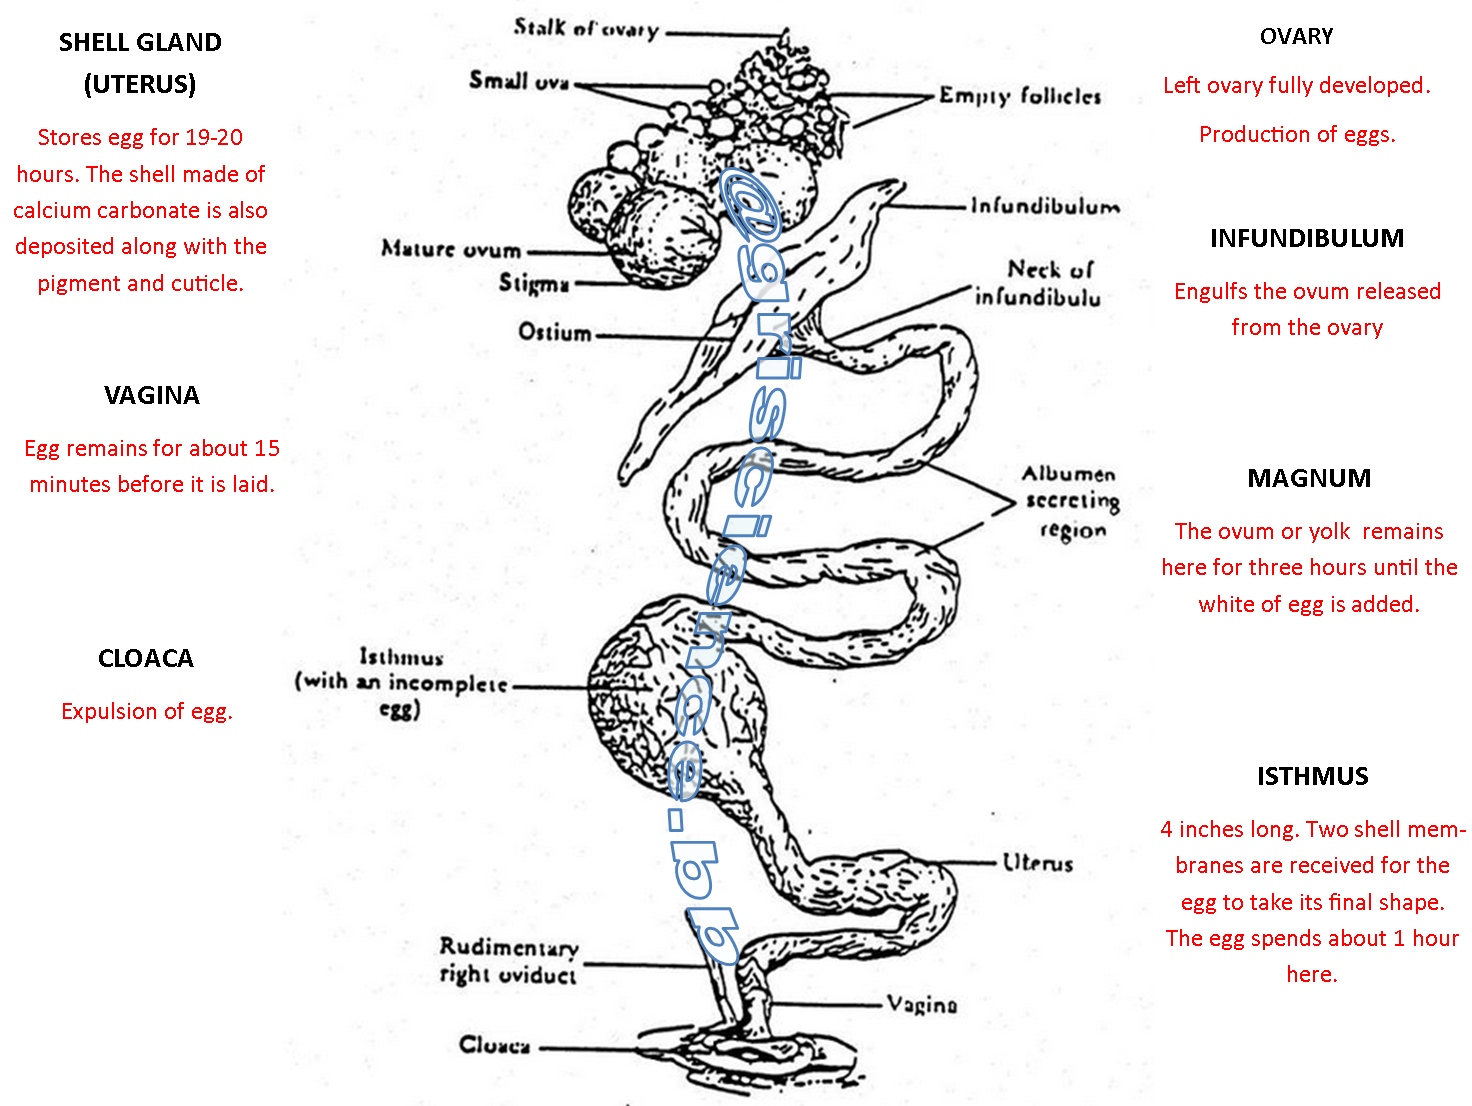 diagram-labelled-diagram-of-female-reproductive-system-174-138-63-91